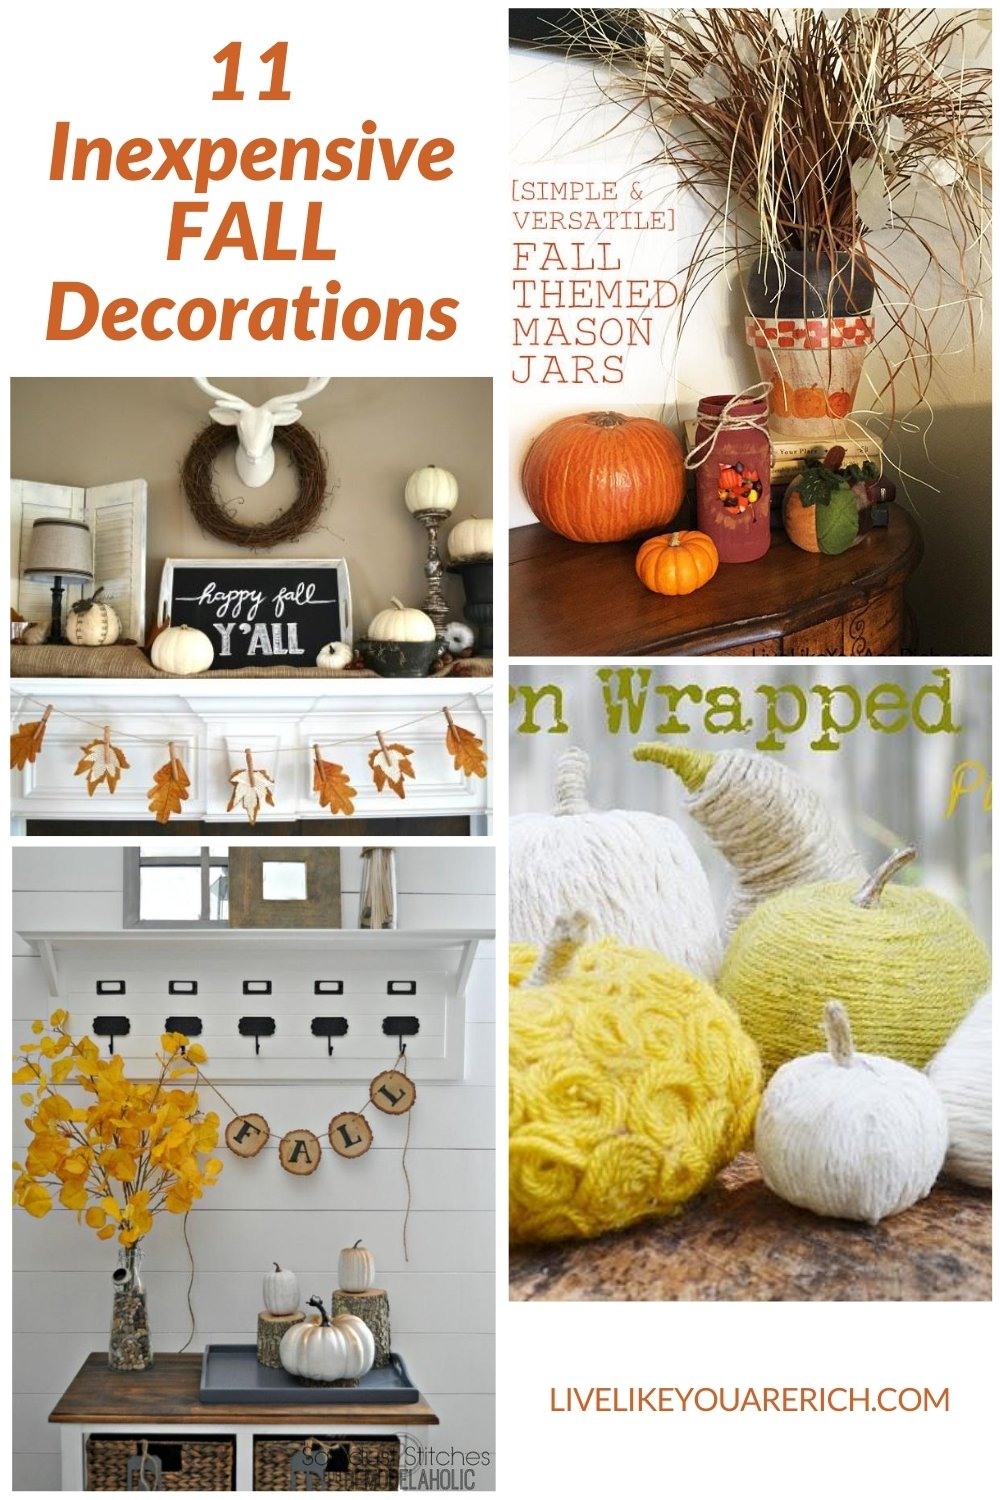 Fall is one of my favorite seasons. I also love Autumn/Fall decor and decided to round up some amazing inexpensive crafts that you can make and decorate with—if desired. Check out these 11 easy and inexpensive fall decorations.